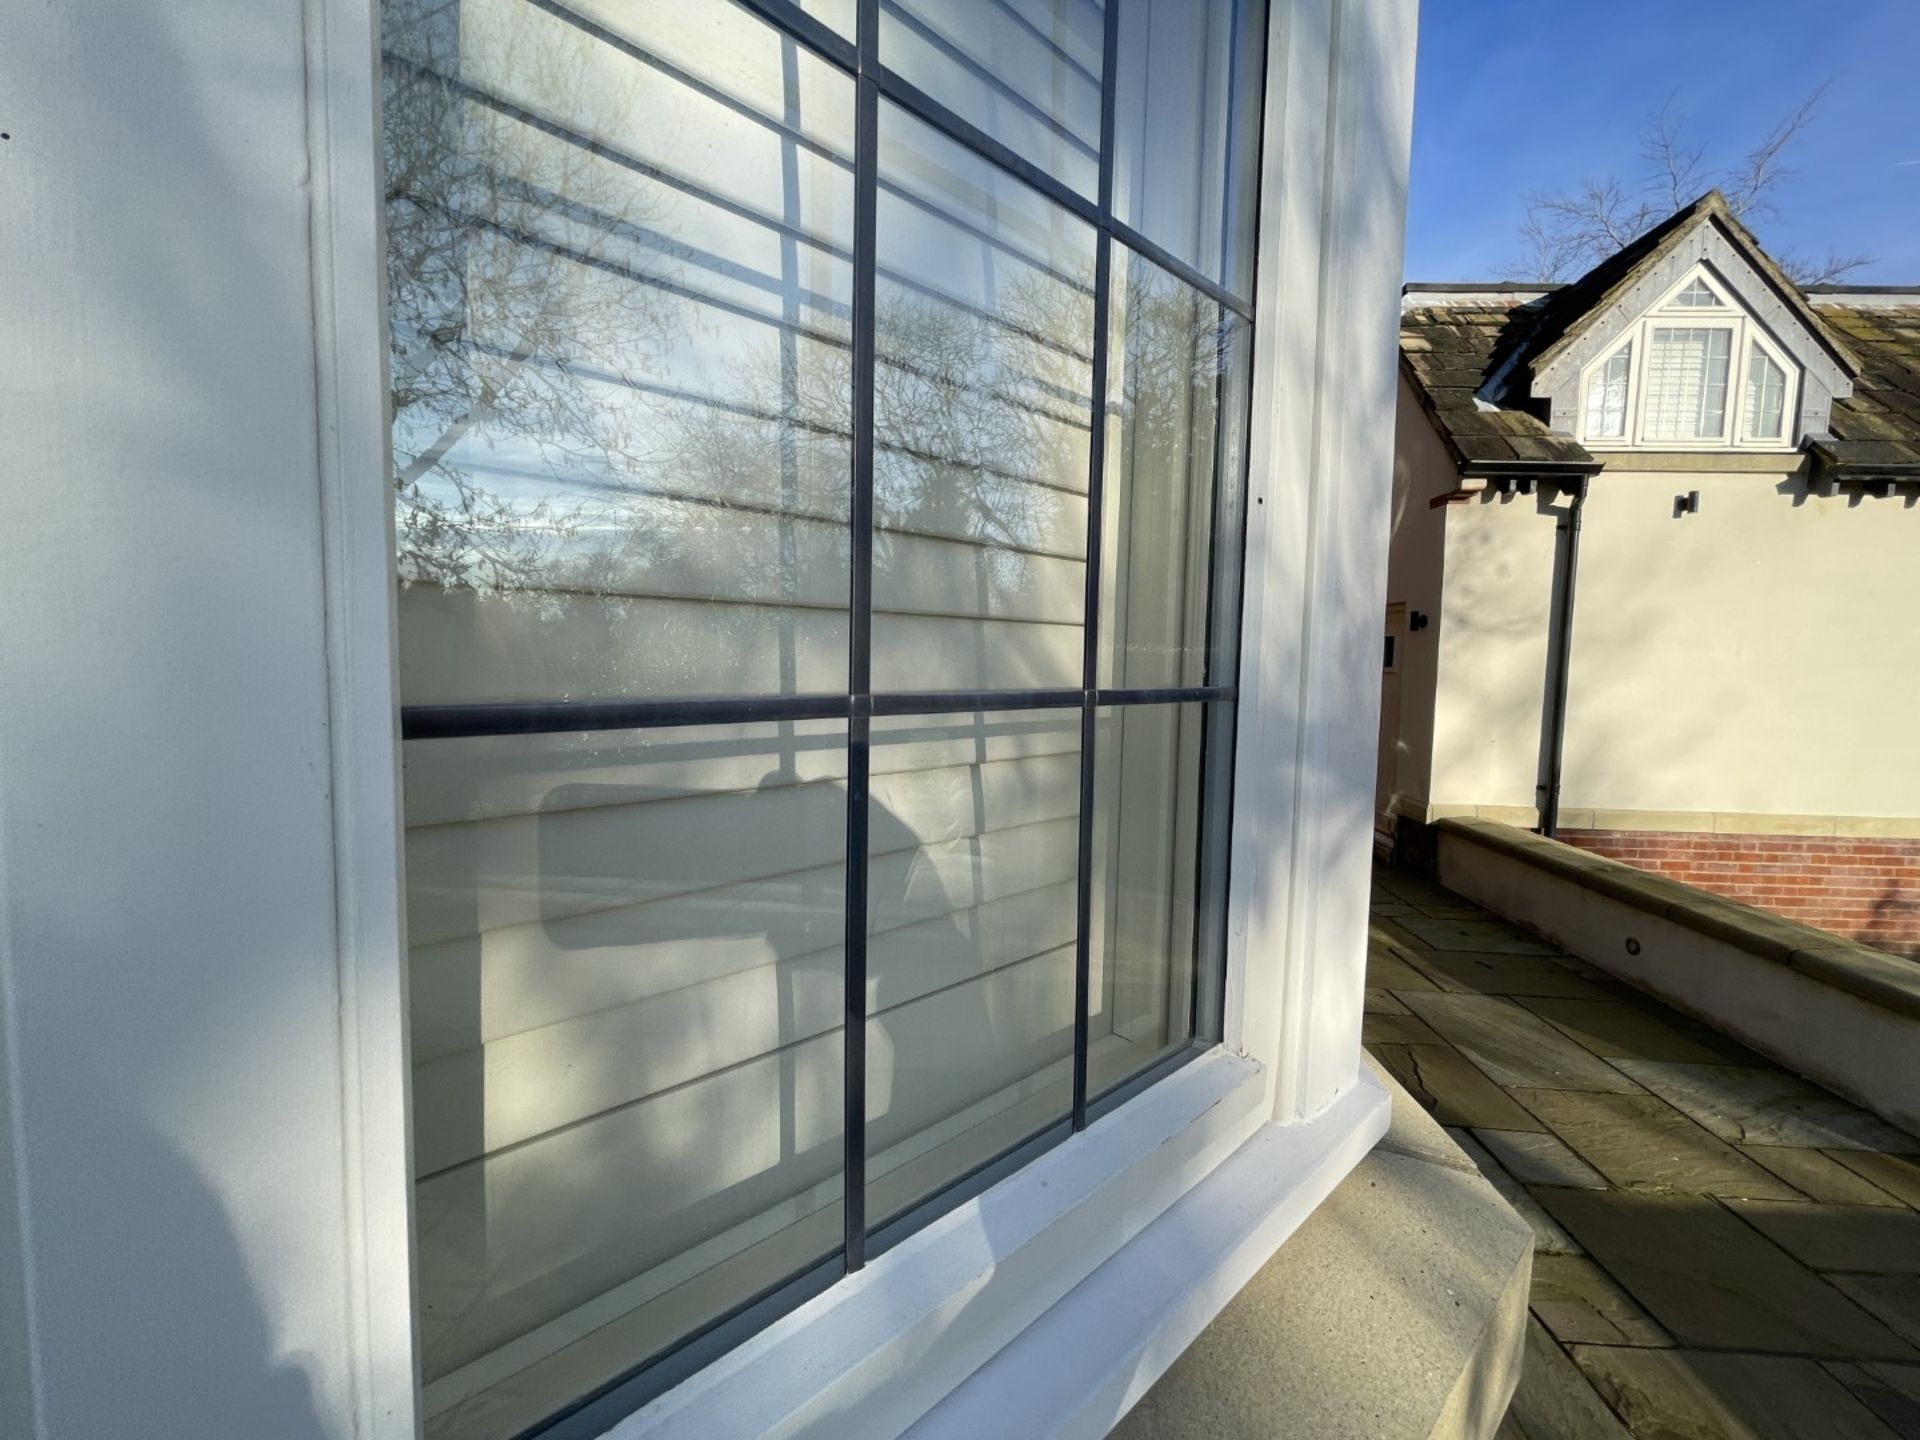 1 x Hardwood Timber Double Glazed Window Frames fitted with Shutter Blinds, In White - Ref: PAN101 - Image 20 of 23